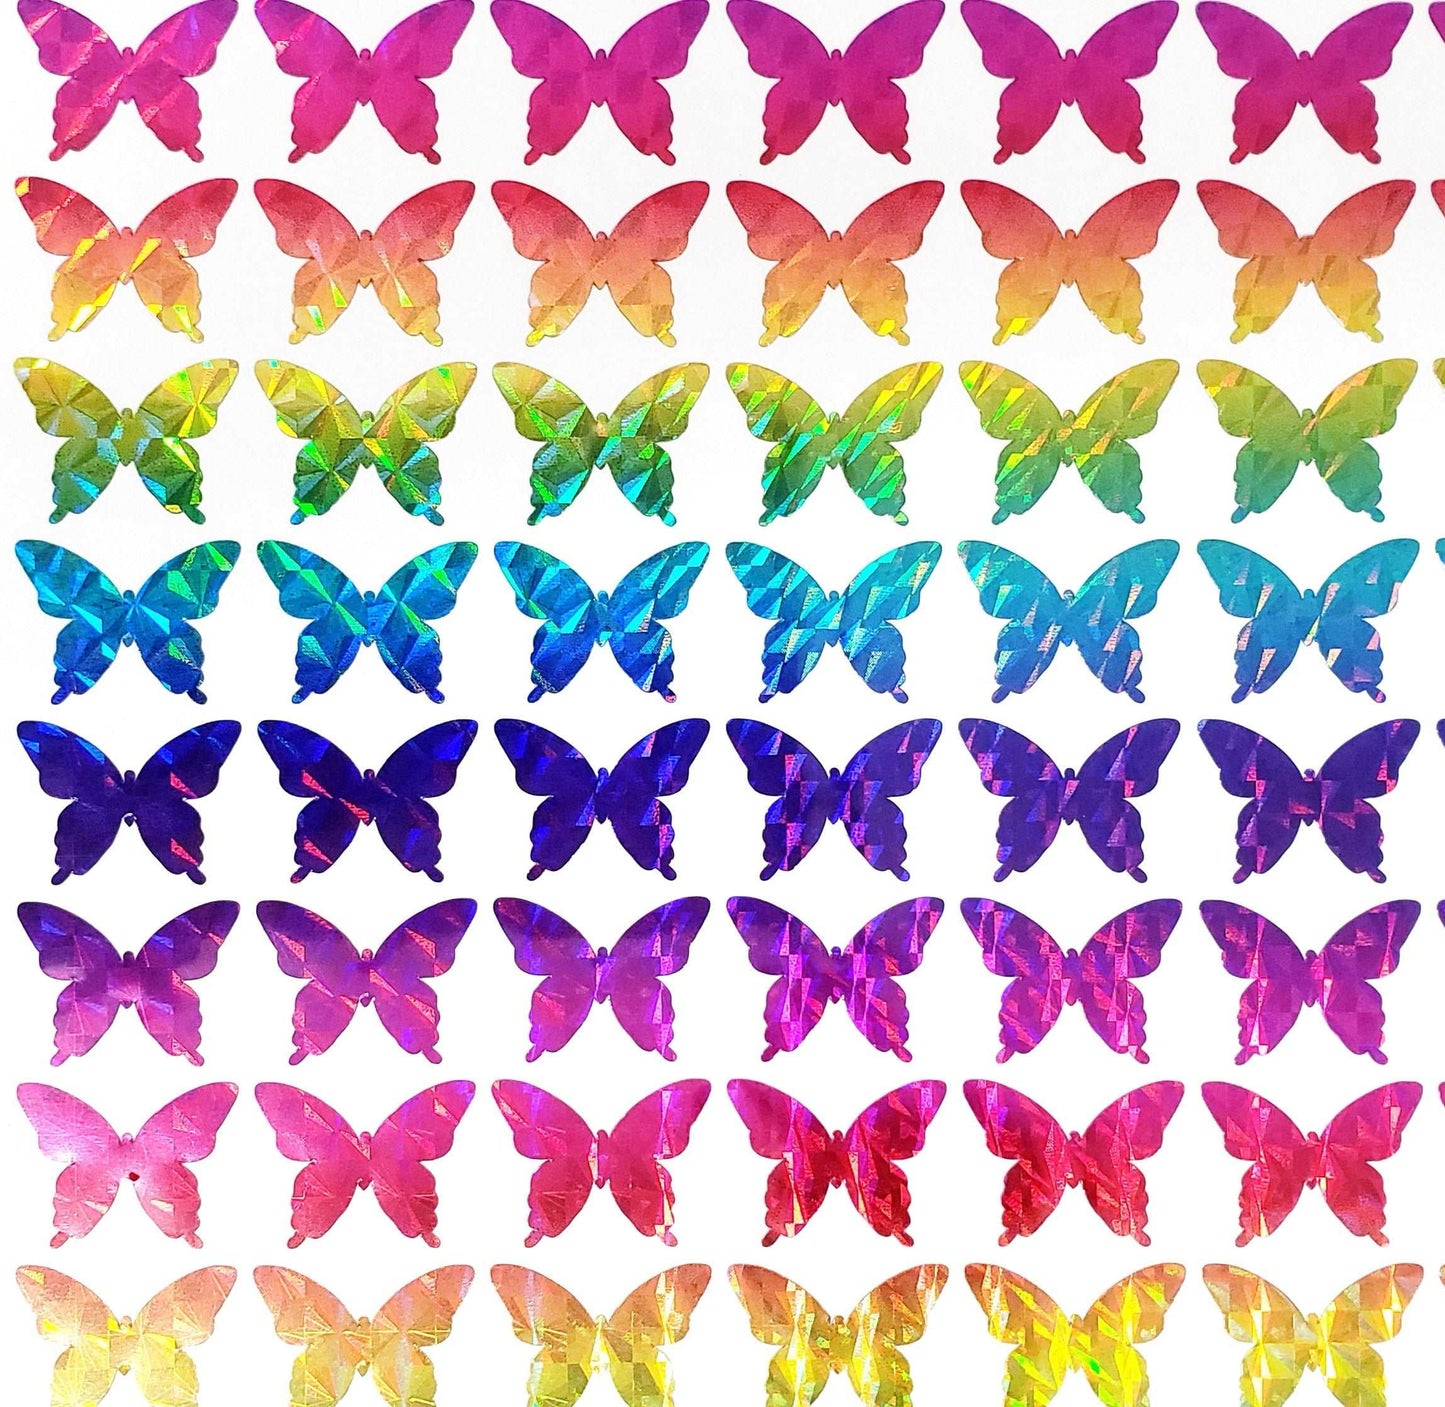 Rainbow Butterfly Stickers, set of 25, 50, 100 or 200 sparkly rainbow vinyl butterflies, stickers for planners, envelopes and journals.